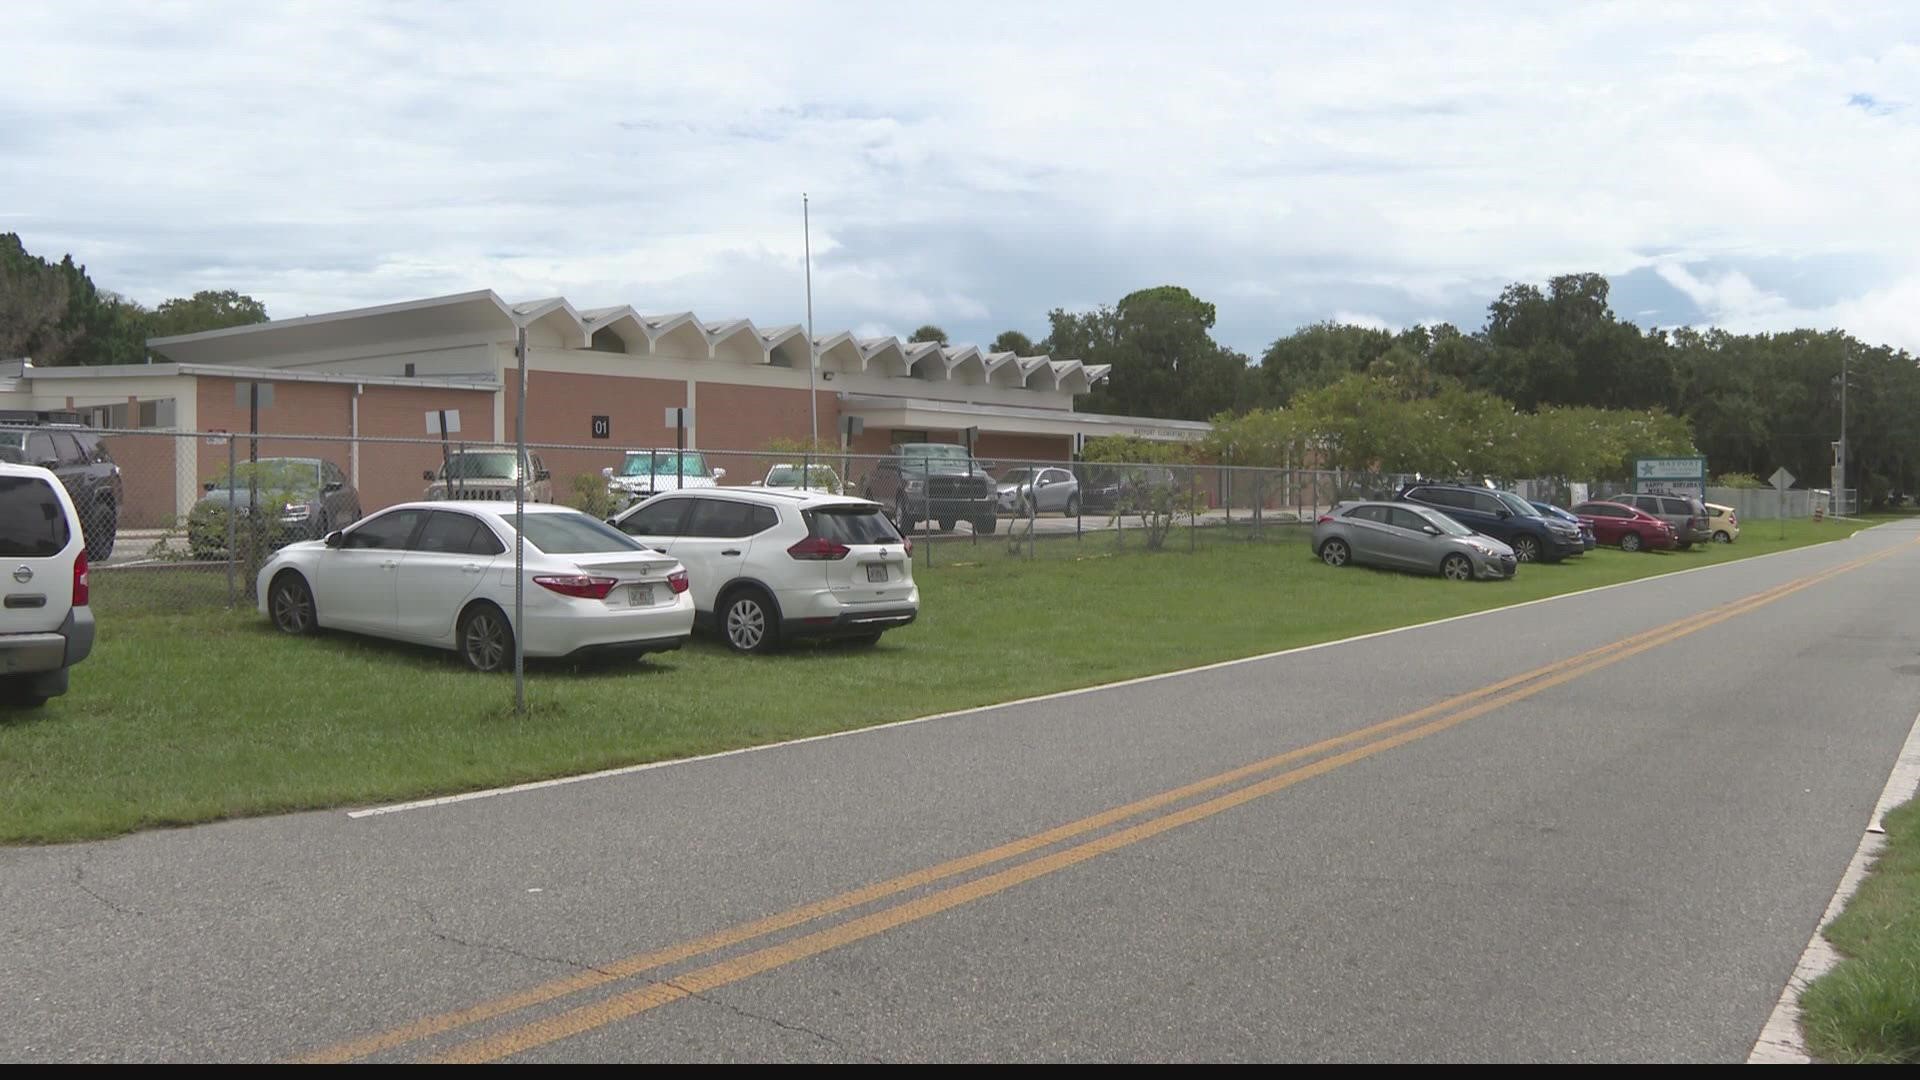 Mayport Elementary School went into lockdown after the incident, but business as usual has now resumed.